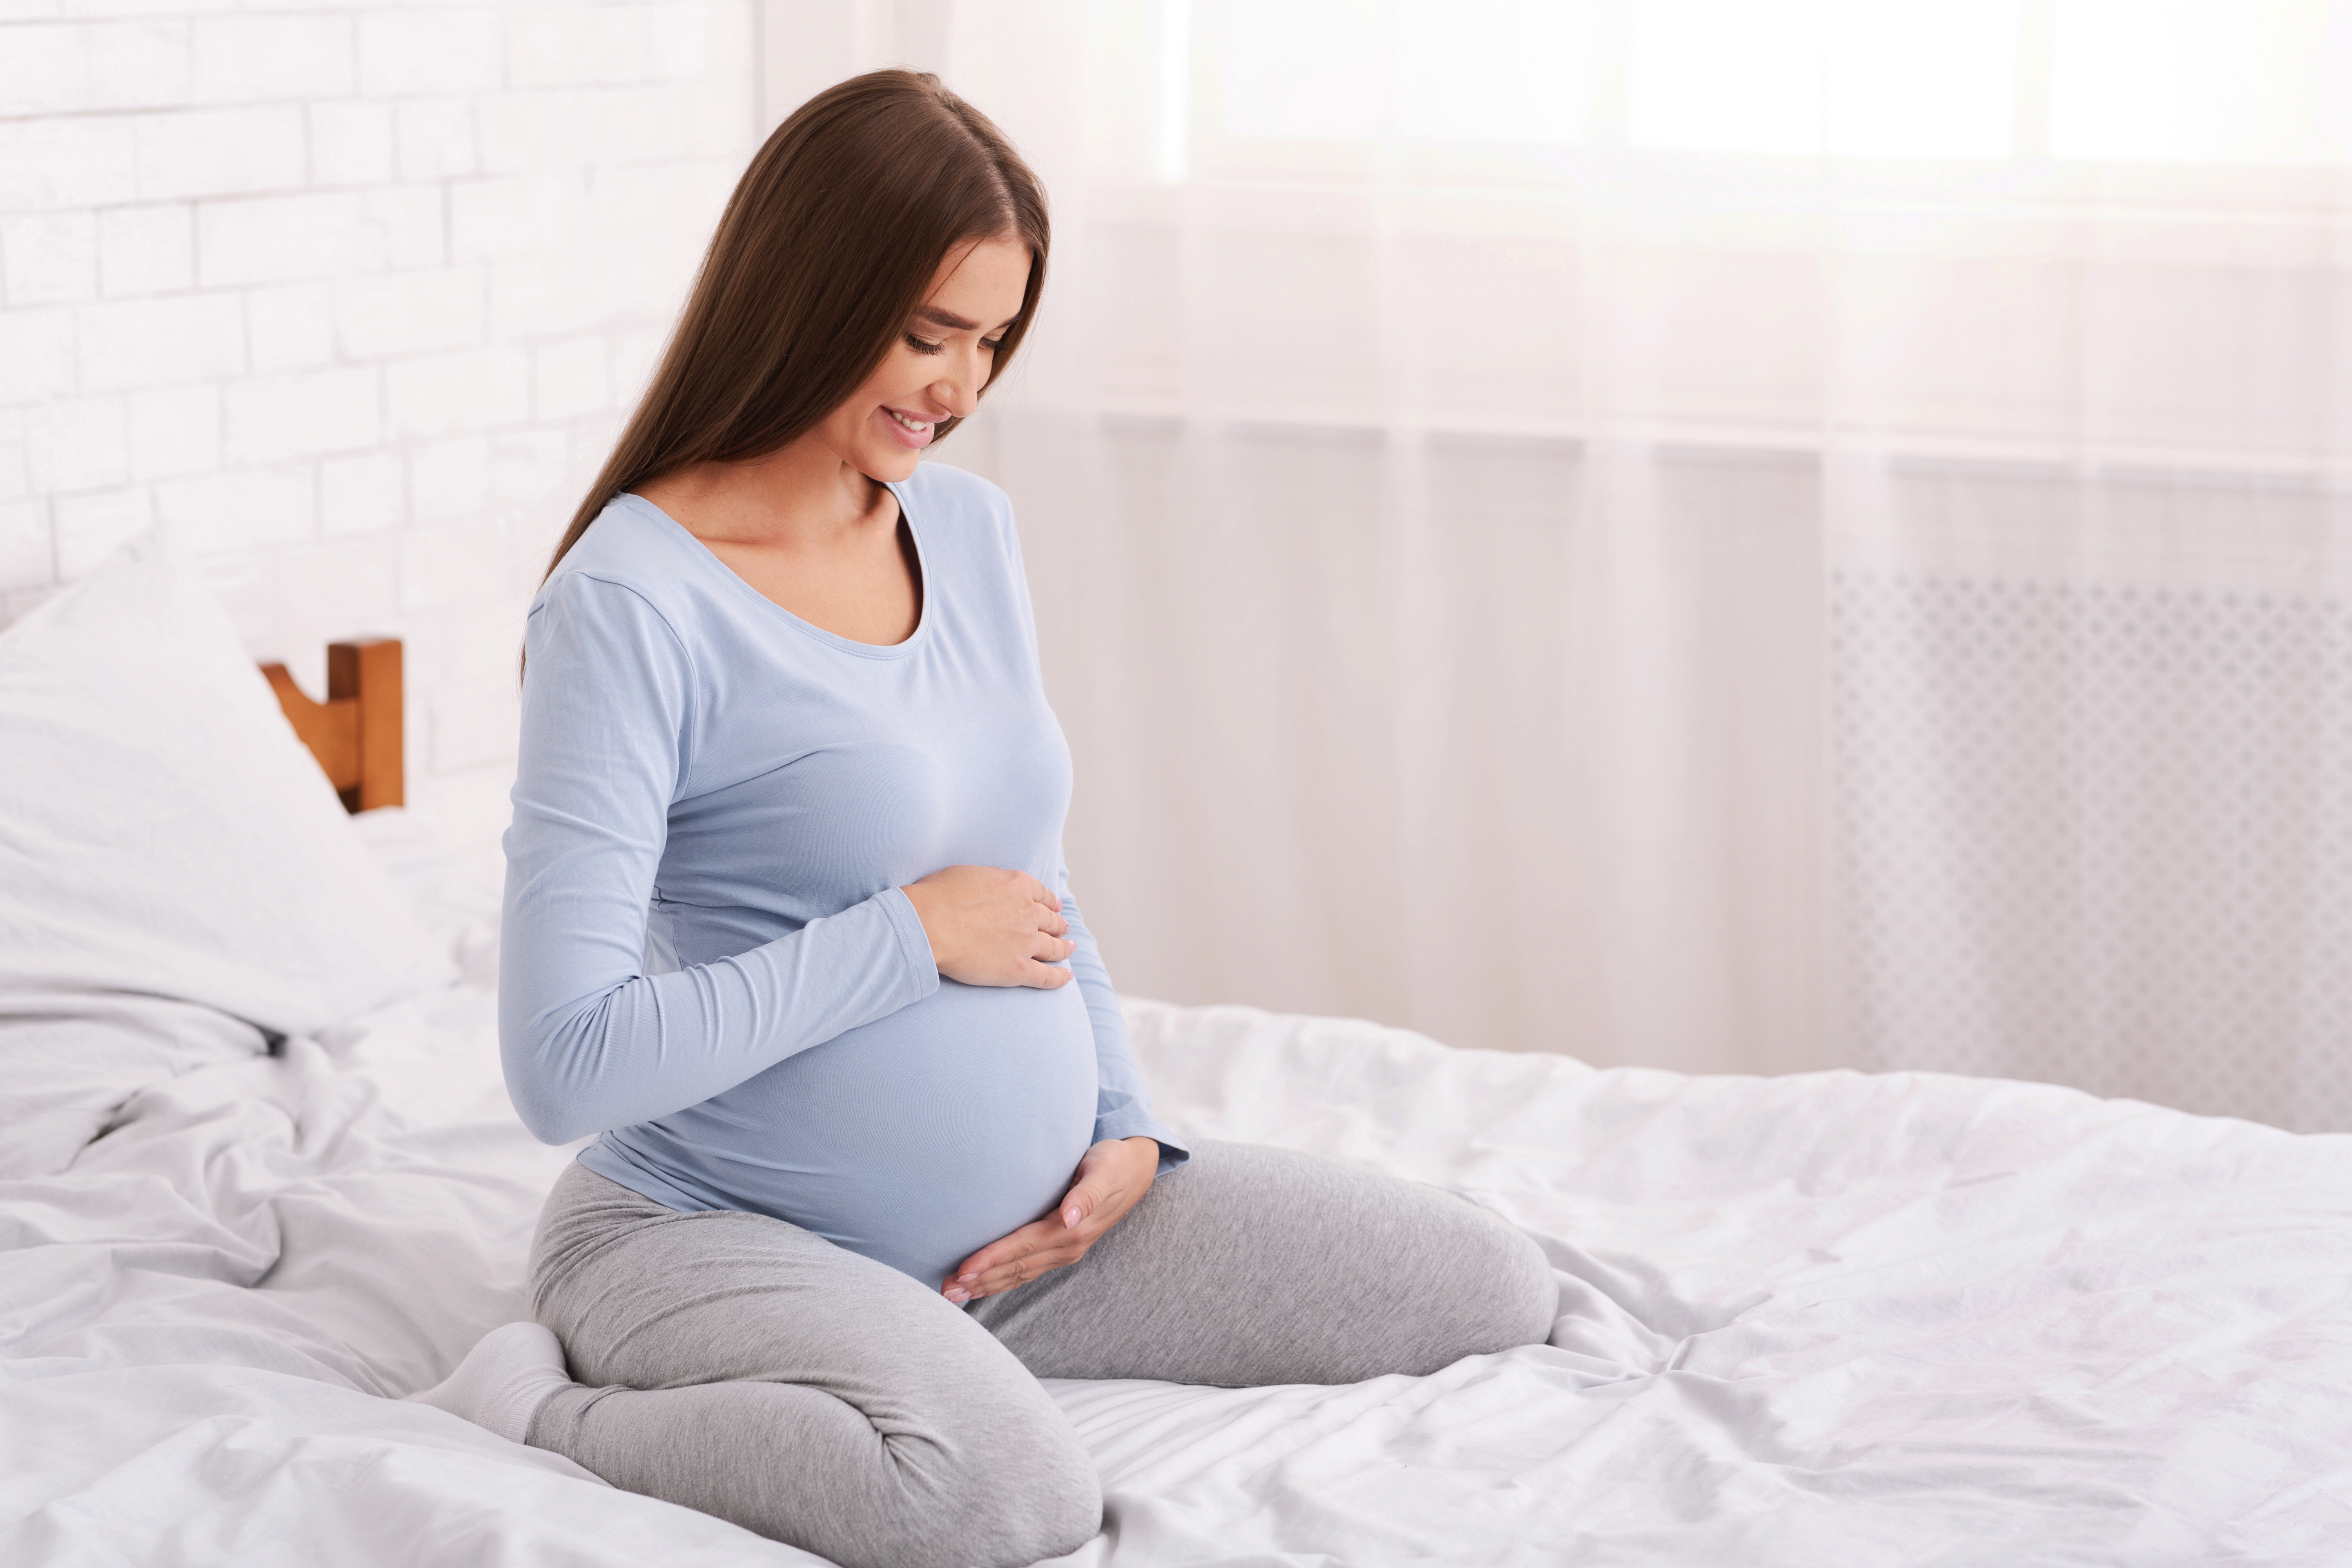 Pregnant lady cradling bump on bed in a white room